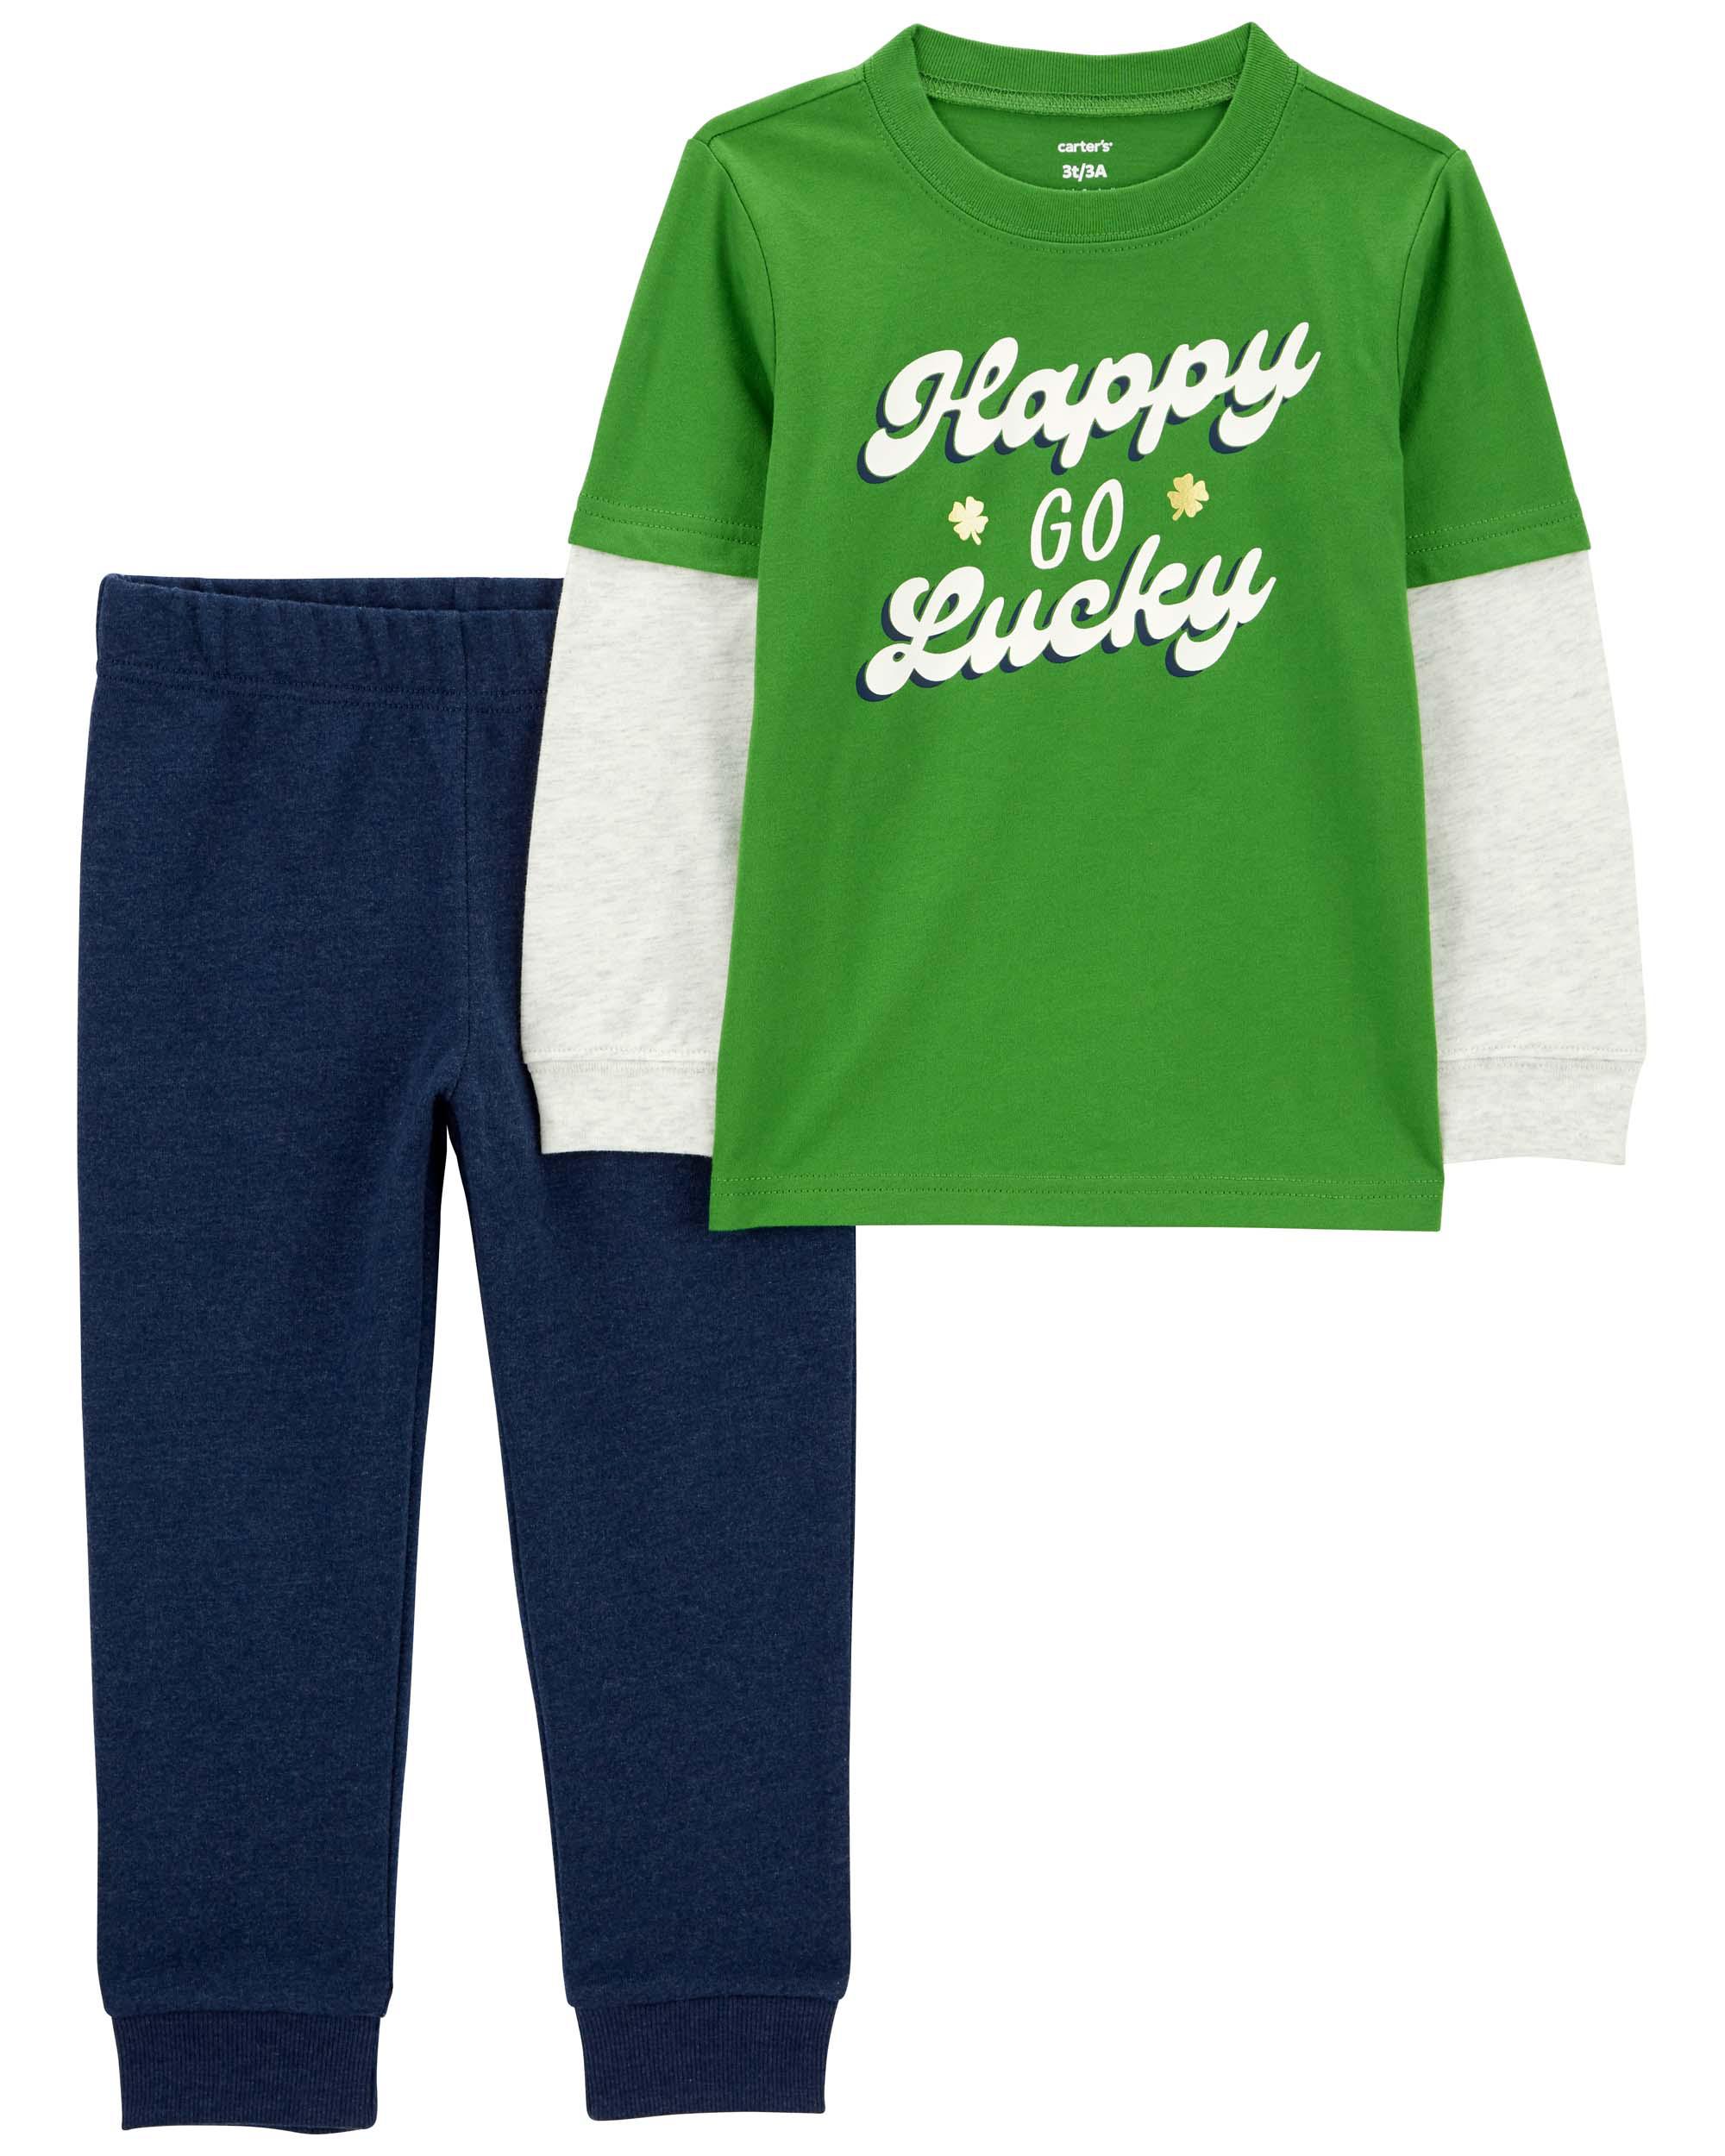 St. Patrick's Day 2-Piece "Happy Go Lucky" Outfit Set